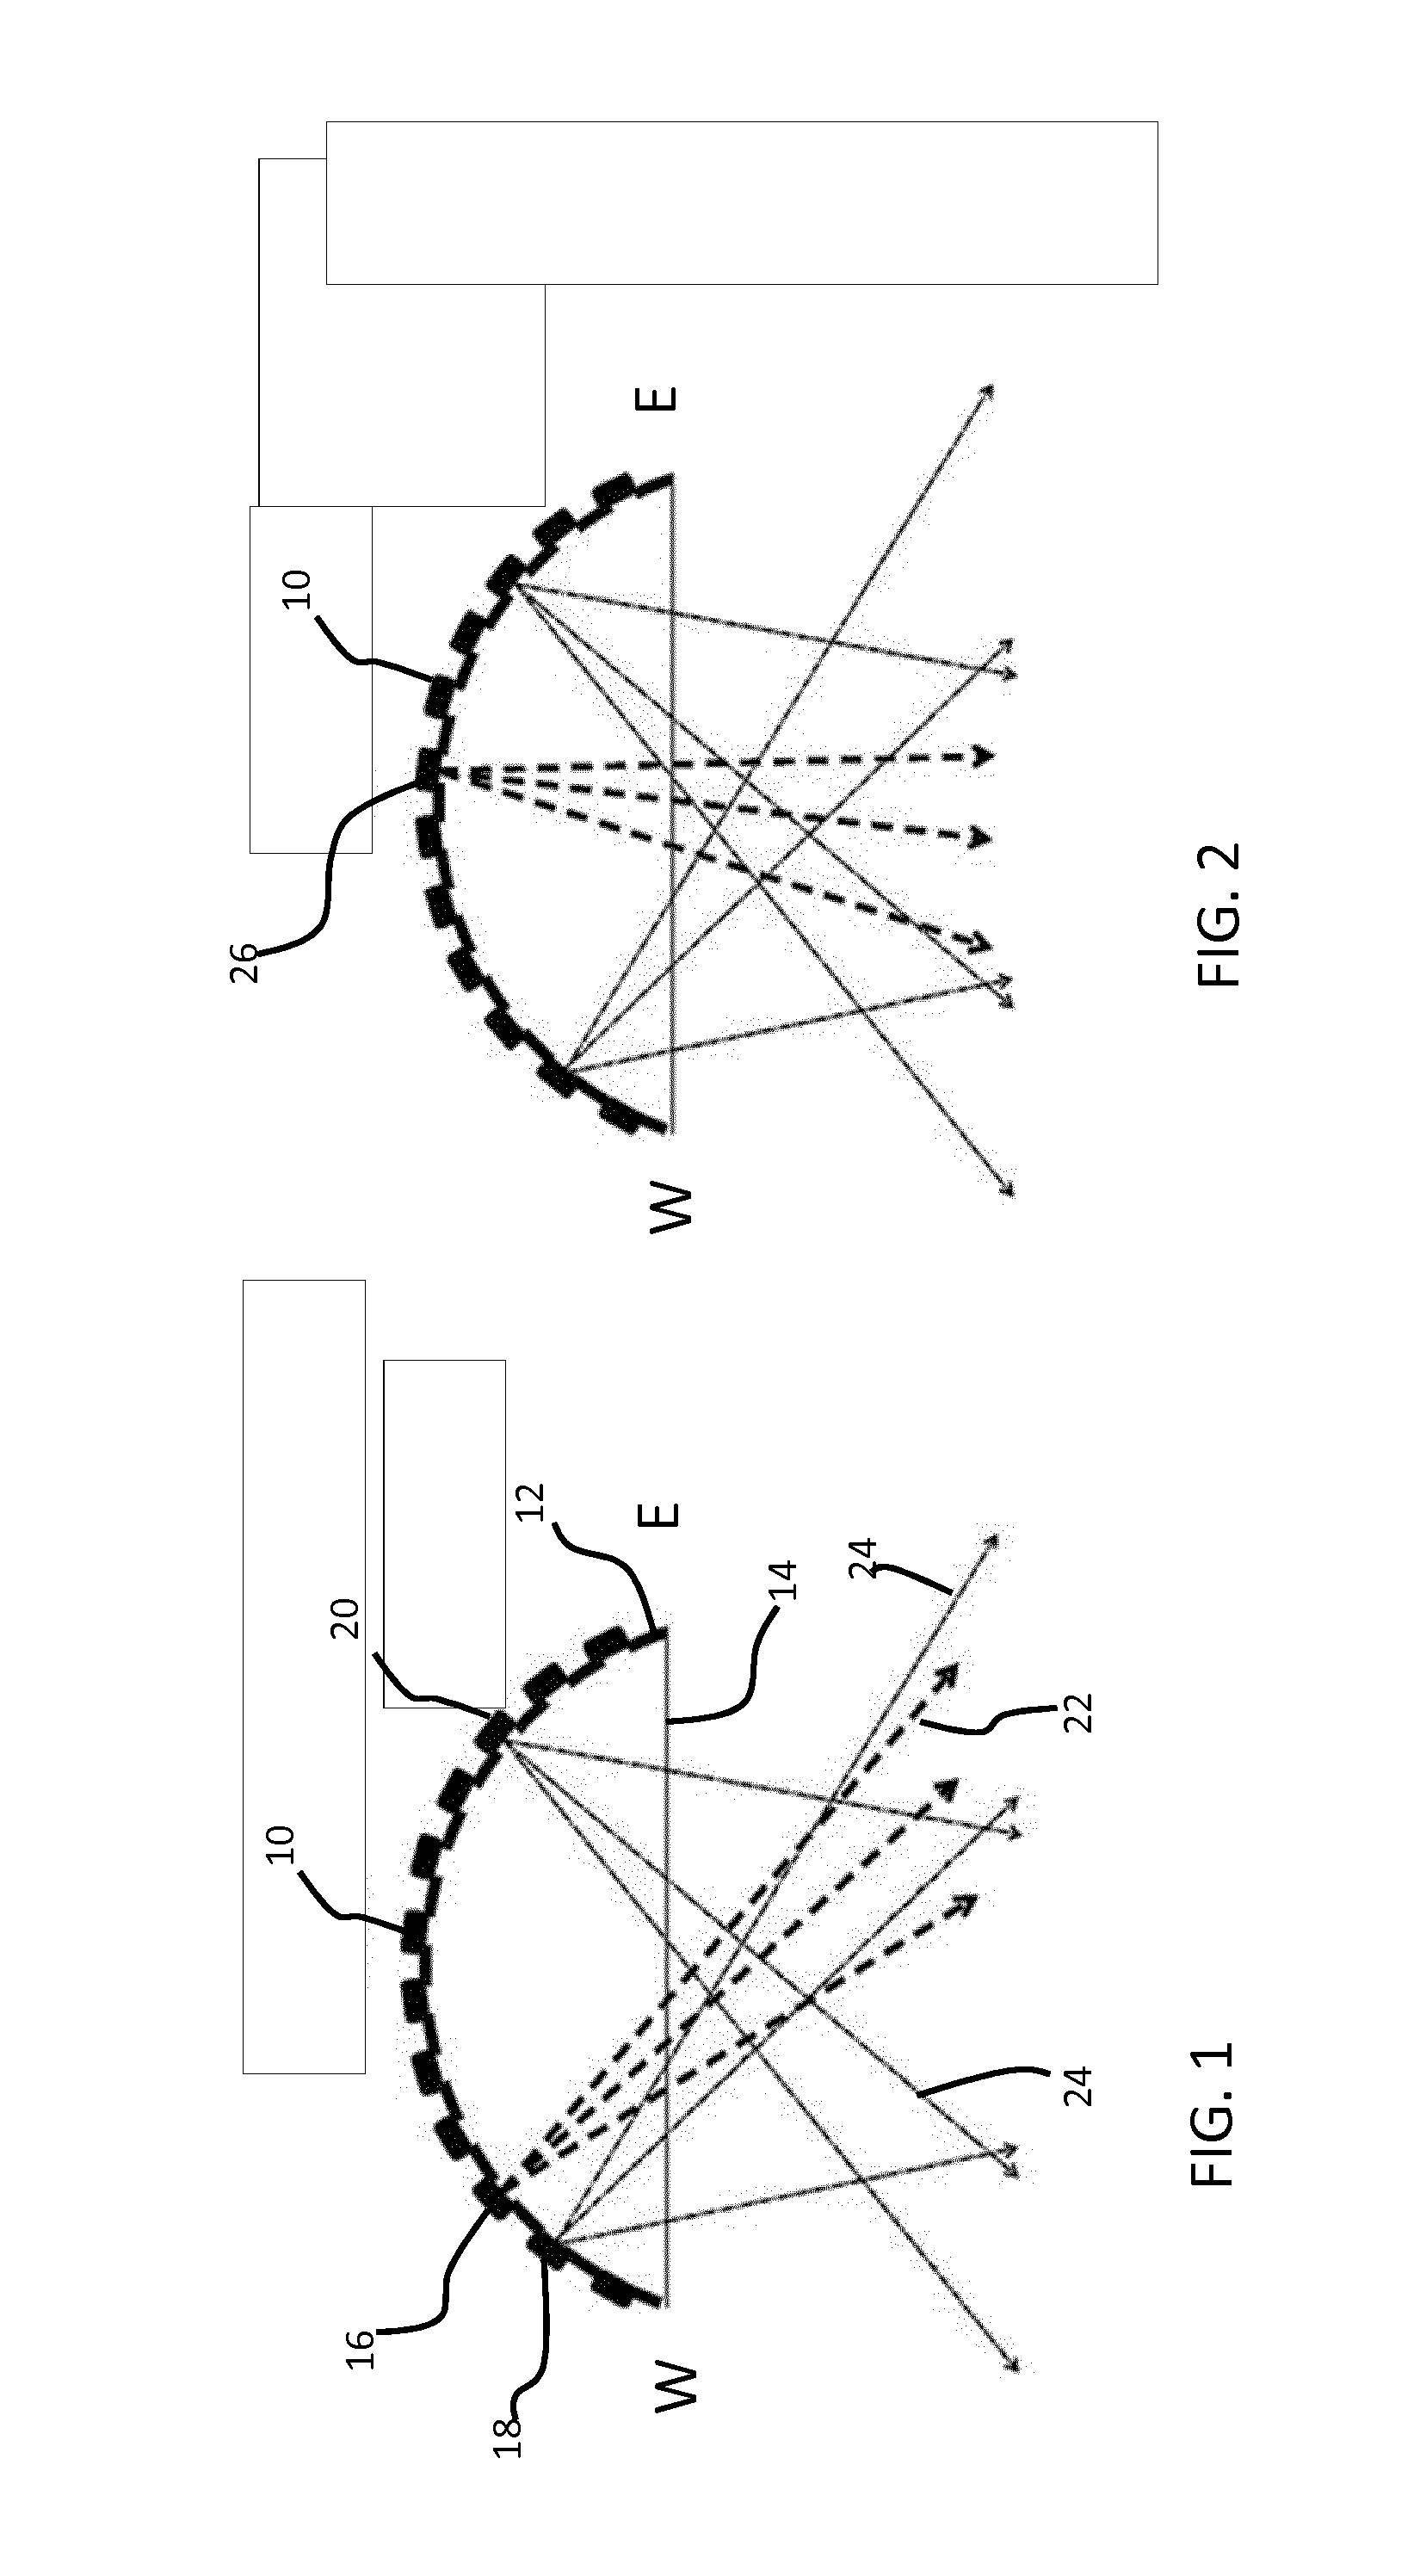 Lighting system and a method of controlling a lighting system